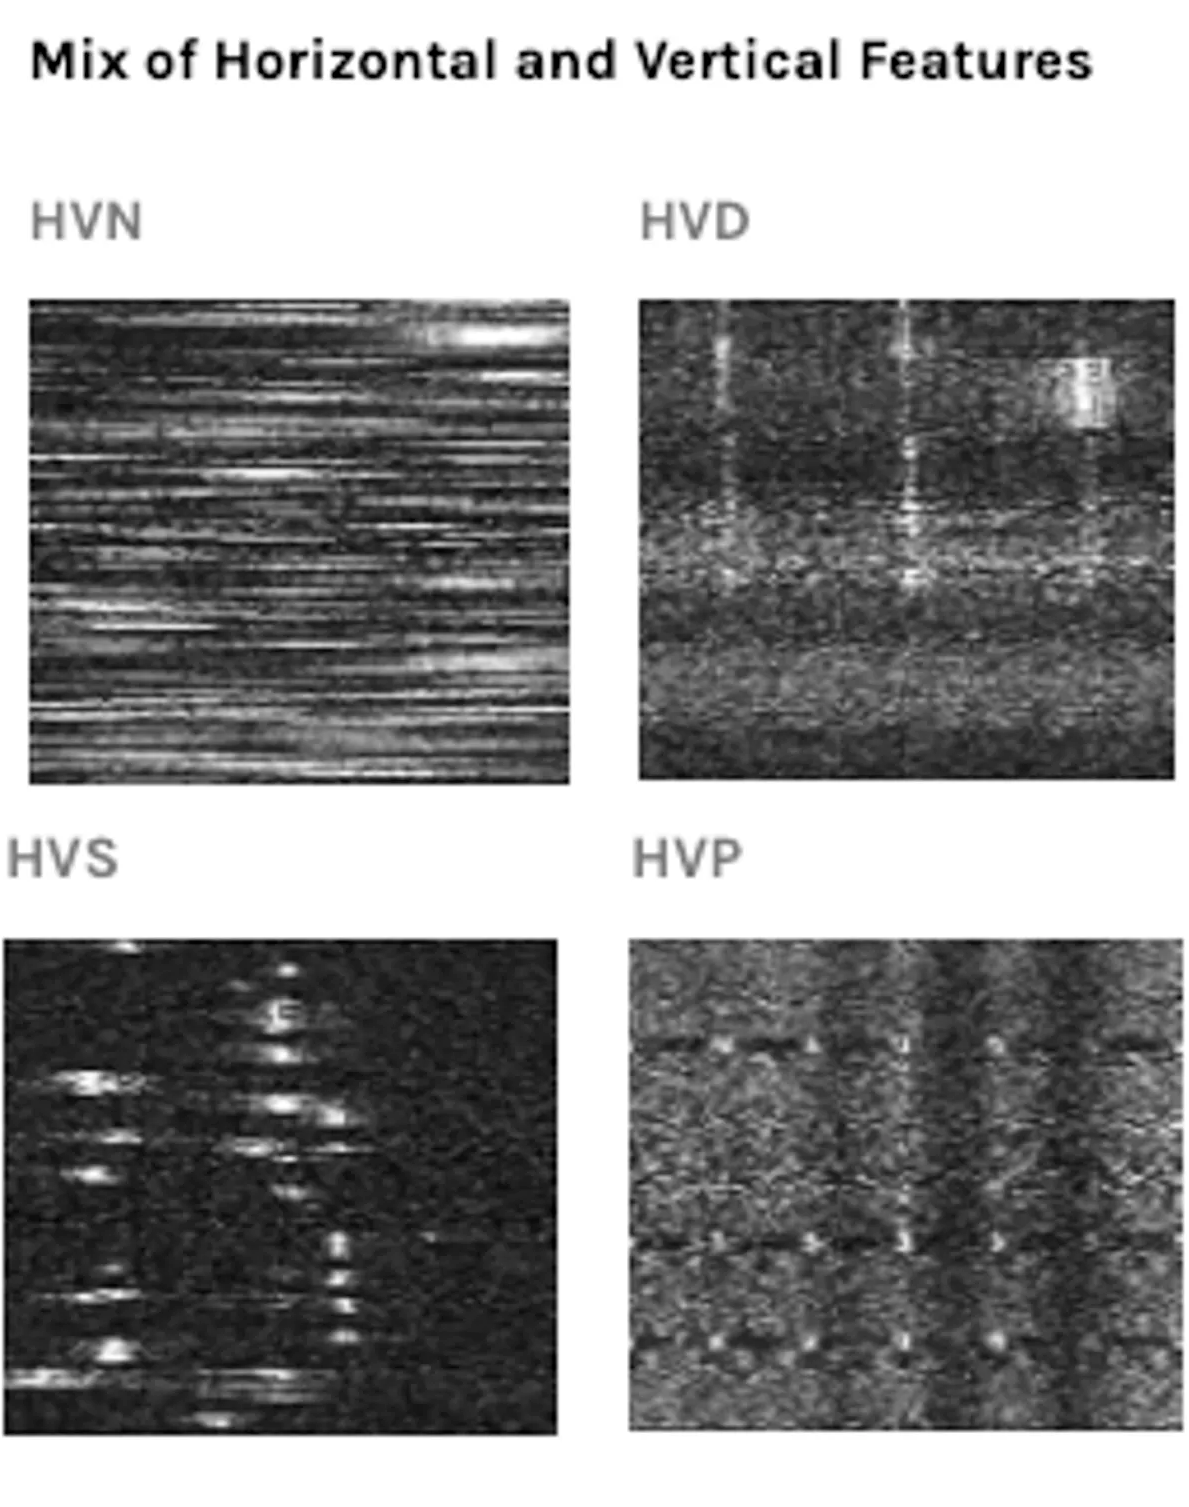 Figure shows a grid of four black squares patterned with white lines and spots represent four of the common patterns of radio signal data being examined in this project. Above the grid are the words “Mix of Horizontal and Vertical Features.”  The upper left square is labeled “HVN” and shows short horizontal lines evenly distributed across the square. The upper right box shows three broad rows of densely packed  white dots, and three bright vertical stripes, each reaching halfway down the square,  evenly distributed across the square. The lower left is labeled “HVS” and shows larger, bright white spots that look smeared left and right, in two roughly vertical columns on the left side of the square. The bottom right square is labeled “HVP” has a nearly even distribution of dots save for three darker columns on the right side and three horizontal stripes of fewer, bigger white dots. 